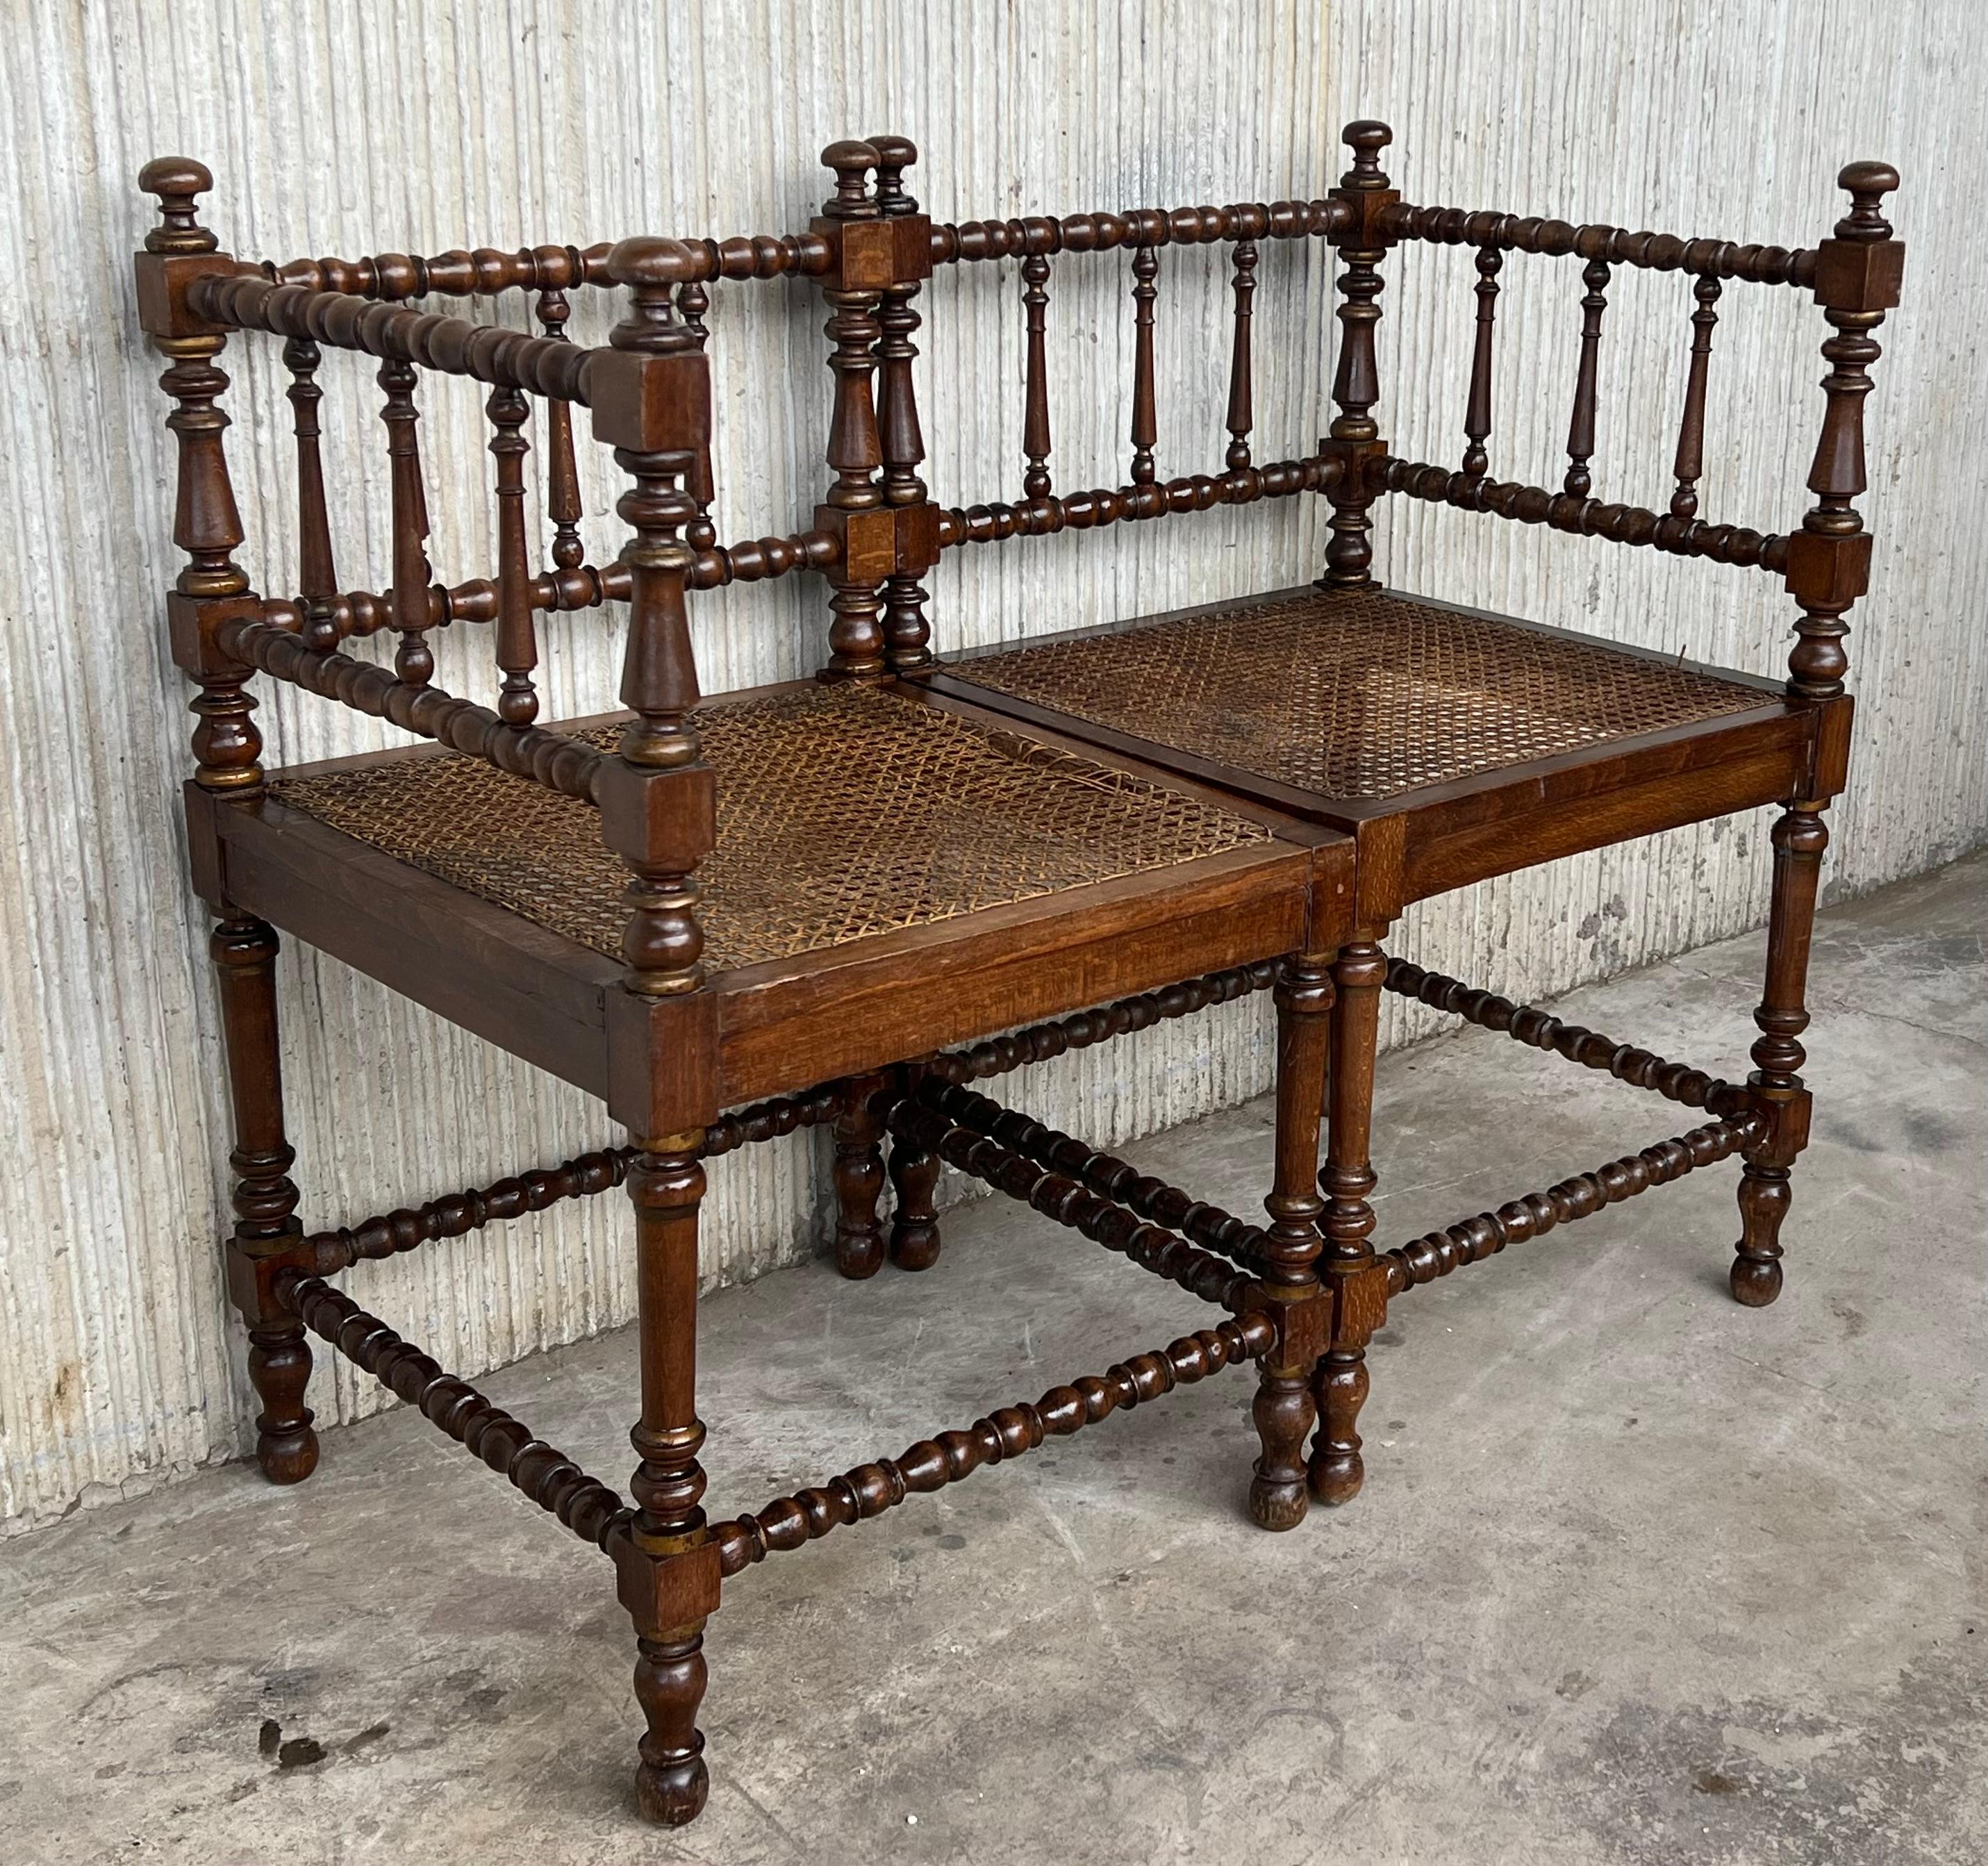 Spanish Colonial Pair of Spanish Corner Turned Armchairs Shaping a Bench with Cane Seat